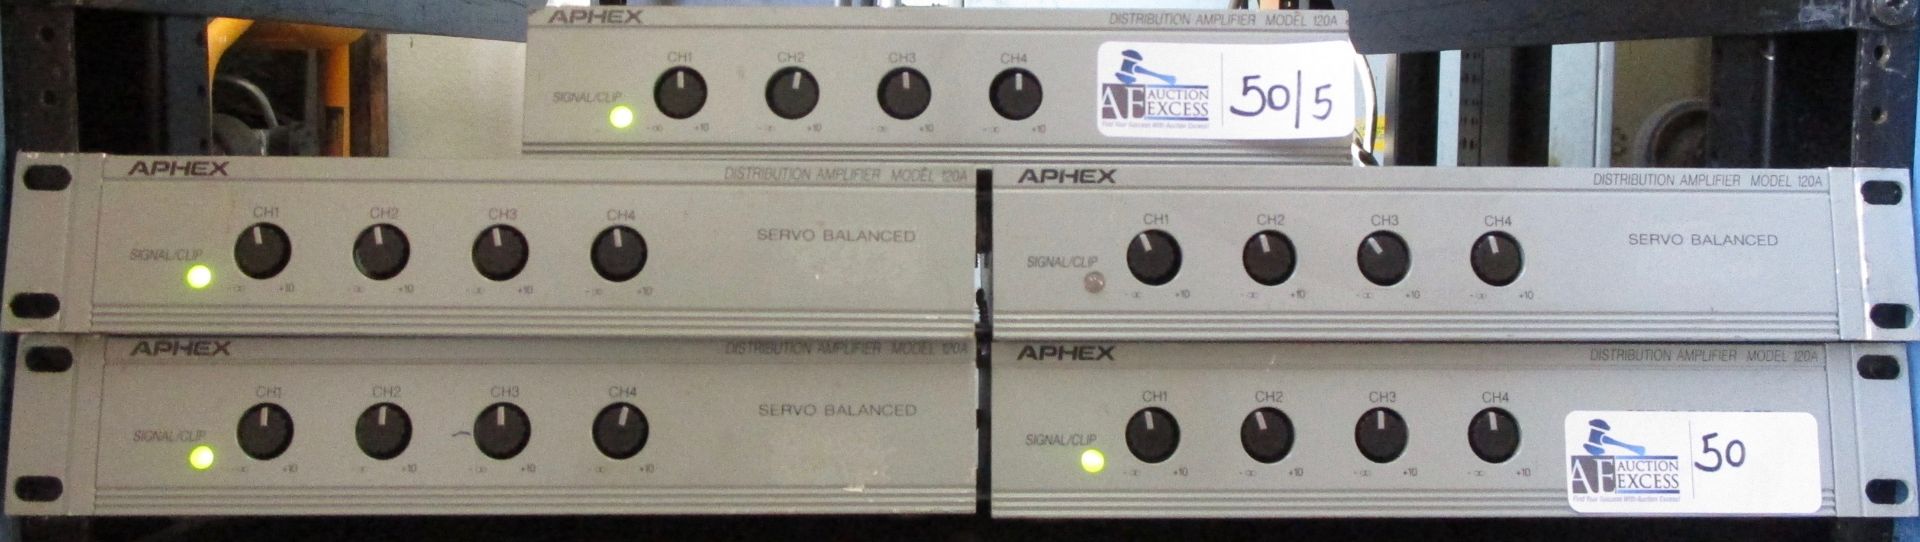 LOT OF 5 APHEX 120A AUDIO INTERFACE